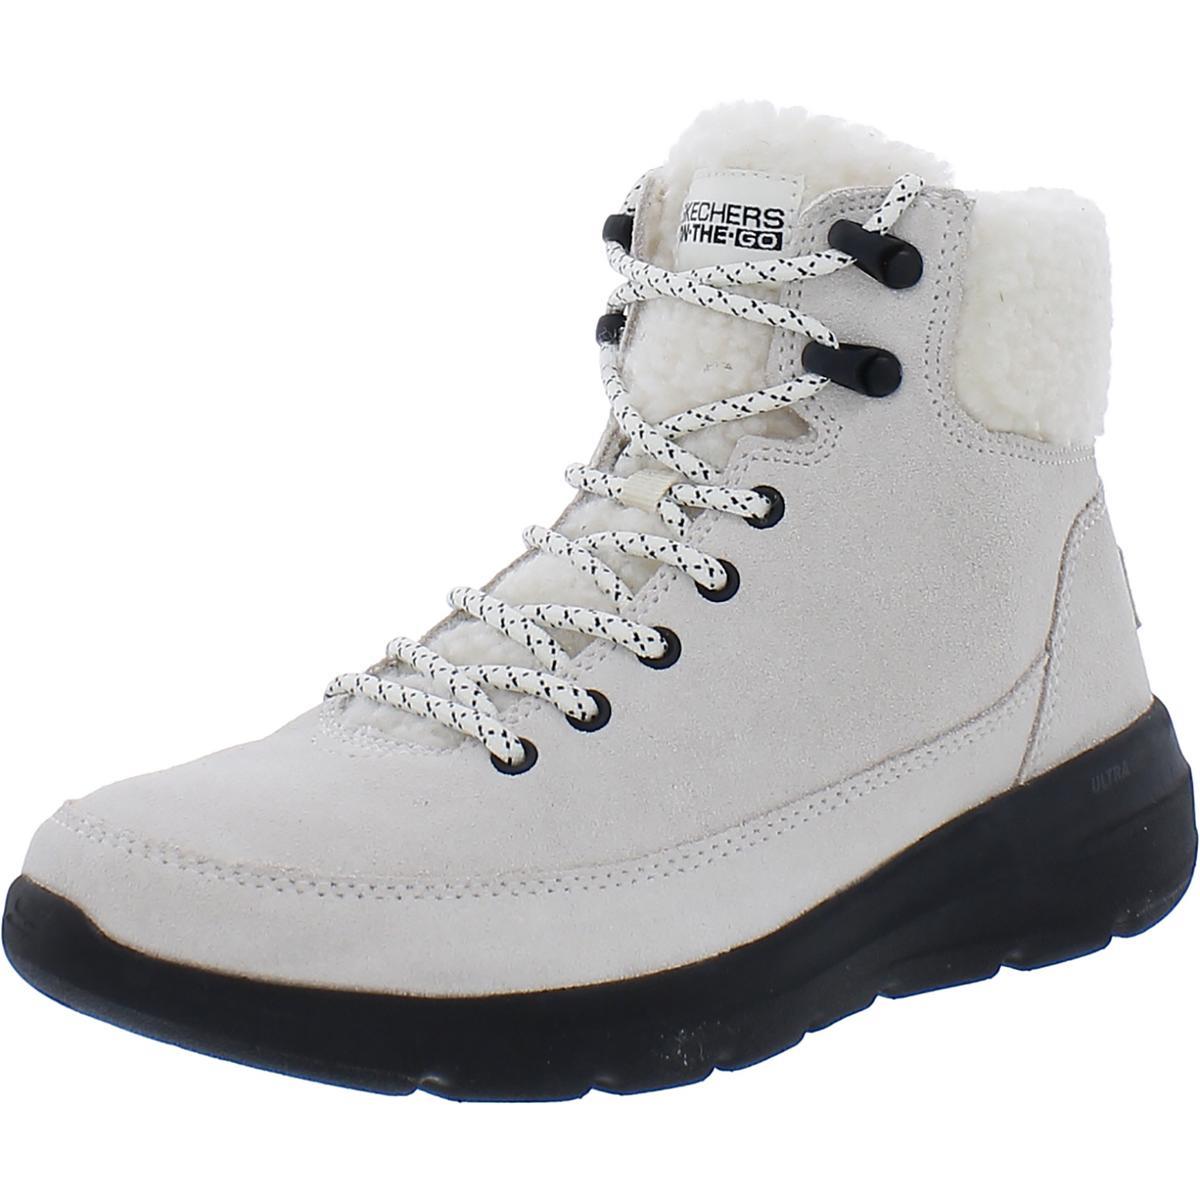 Skechers Womens Glacial Ultra - Wood Suede Winter Snow Boots Shoes Bhfo 0123 White Black